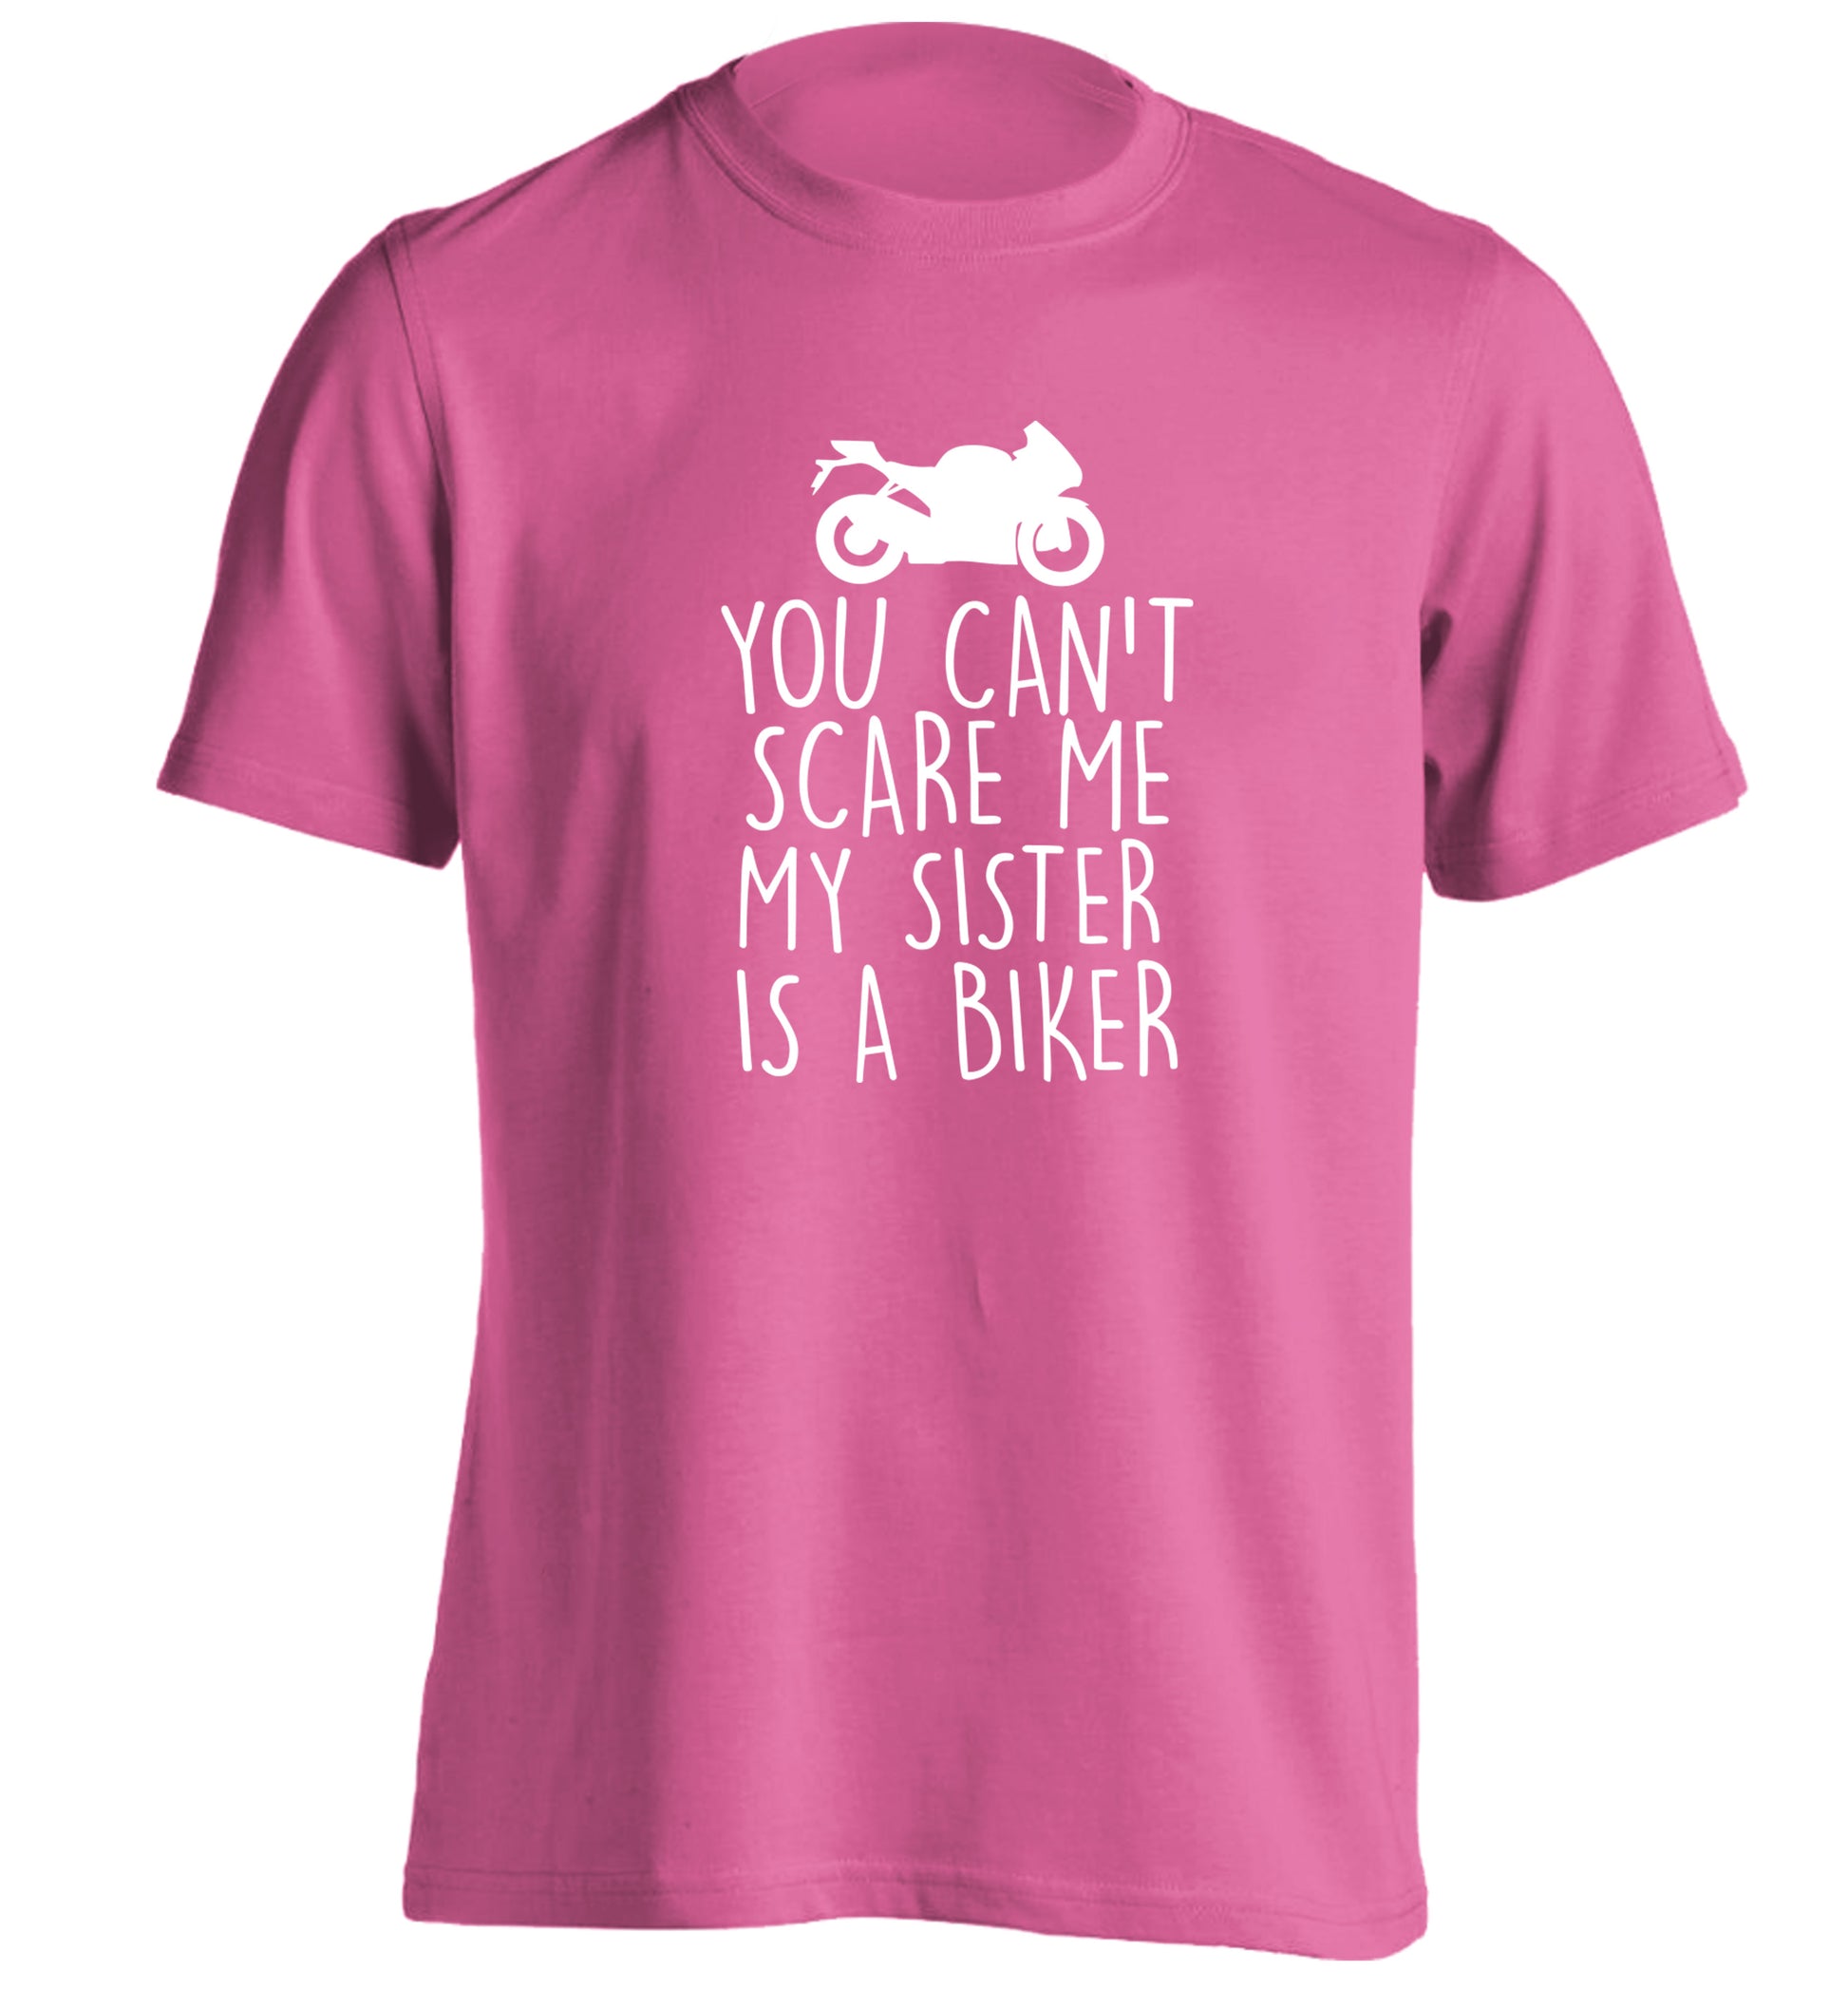 You can't scare me my sister is a biker adults unisex pink Tshirt 2XL